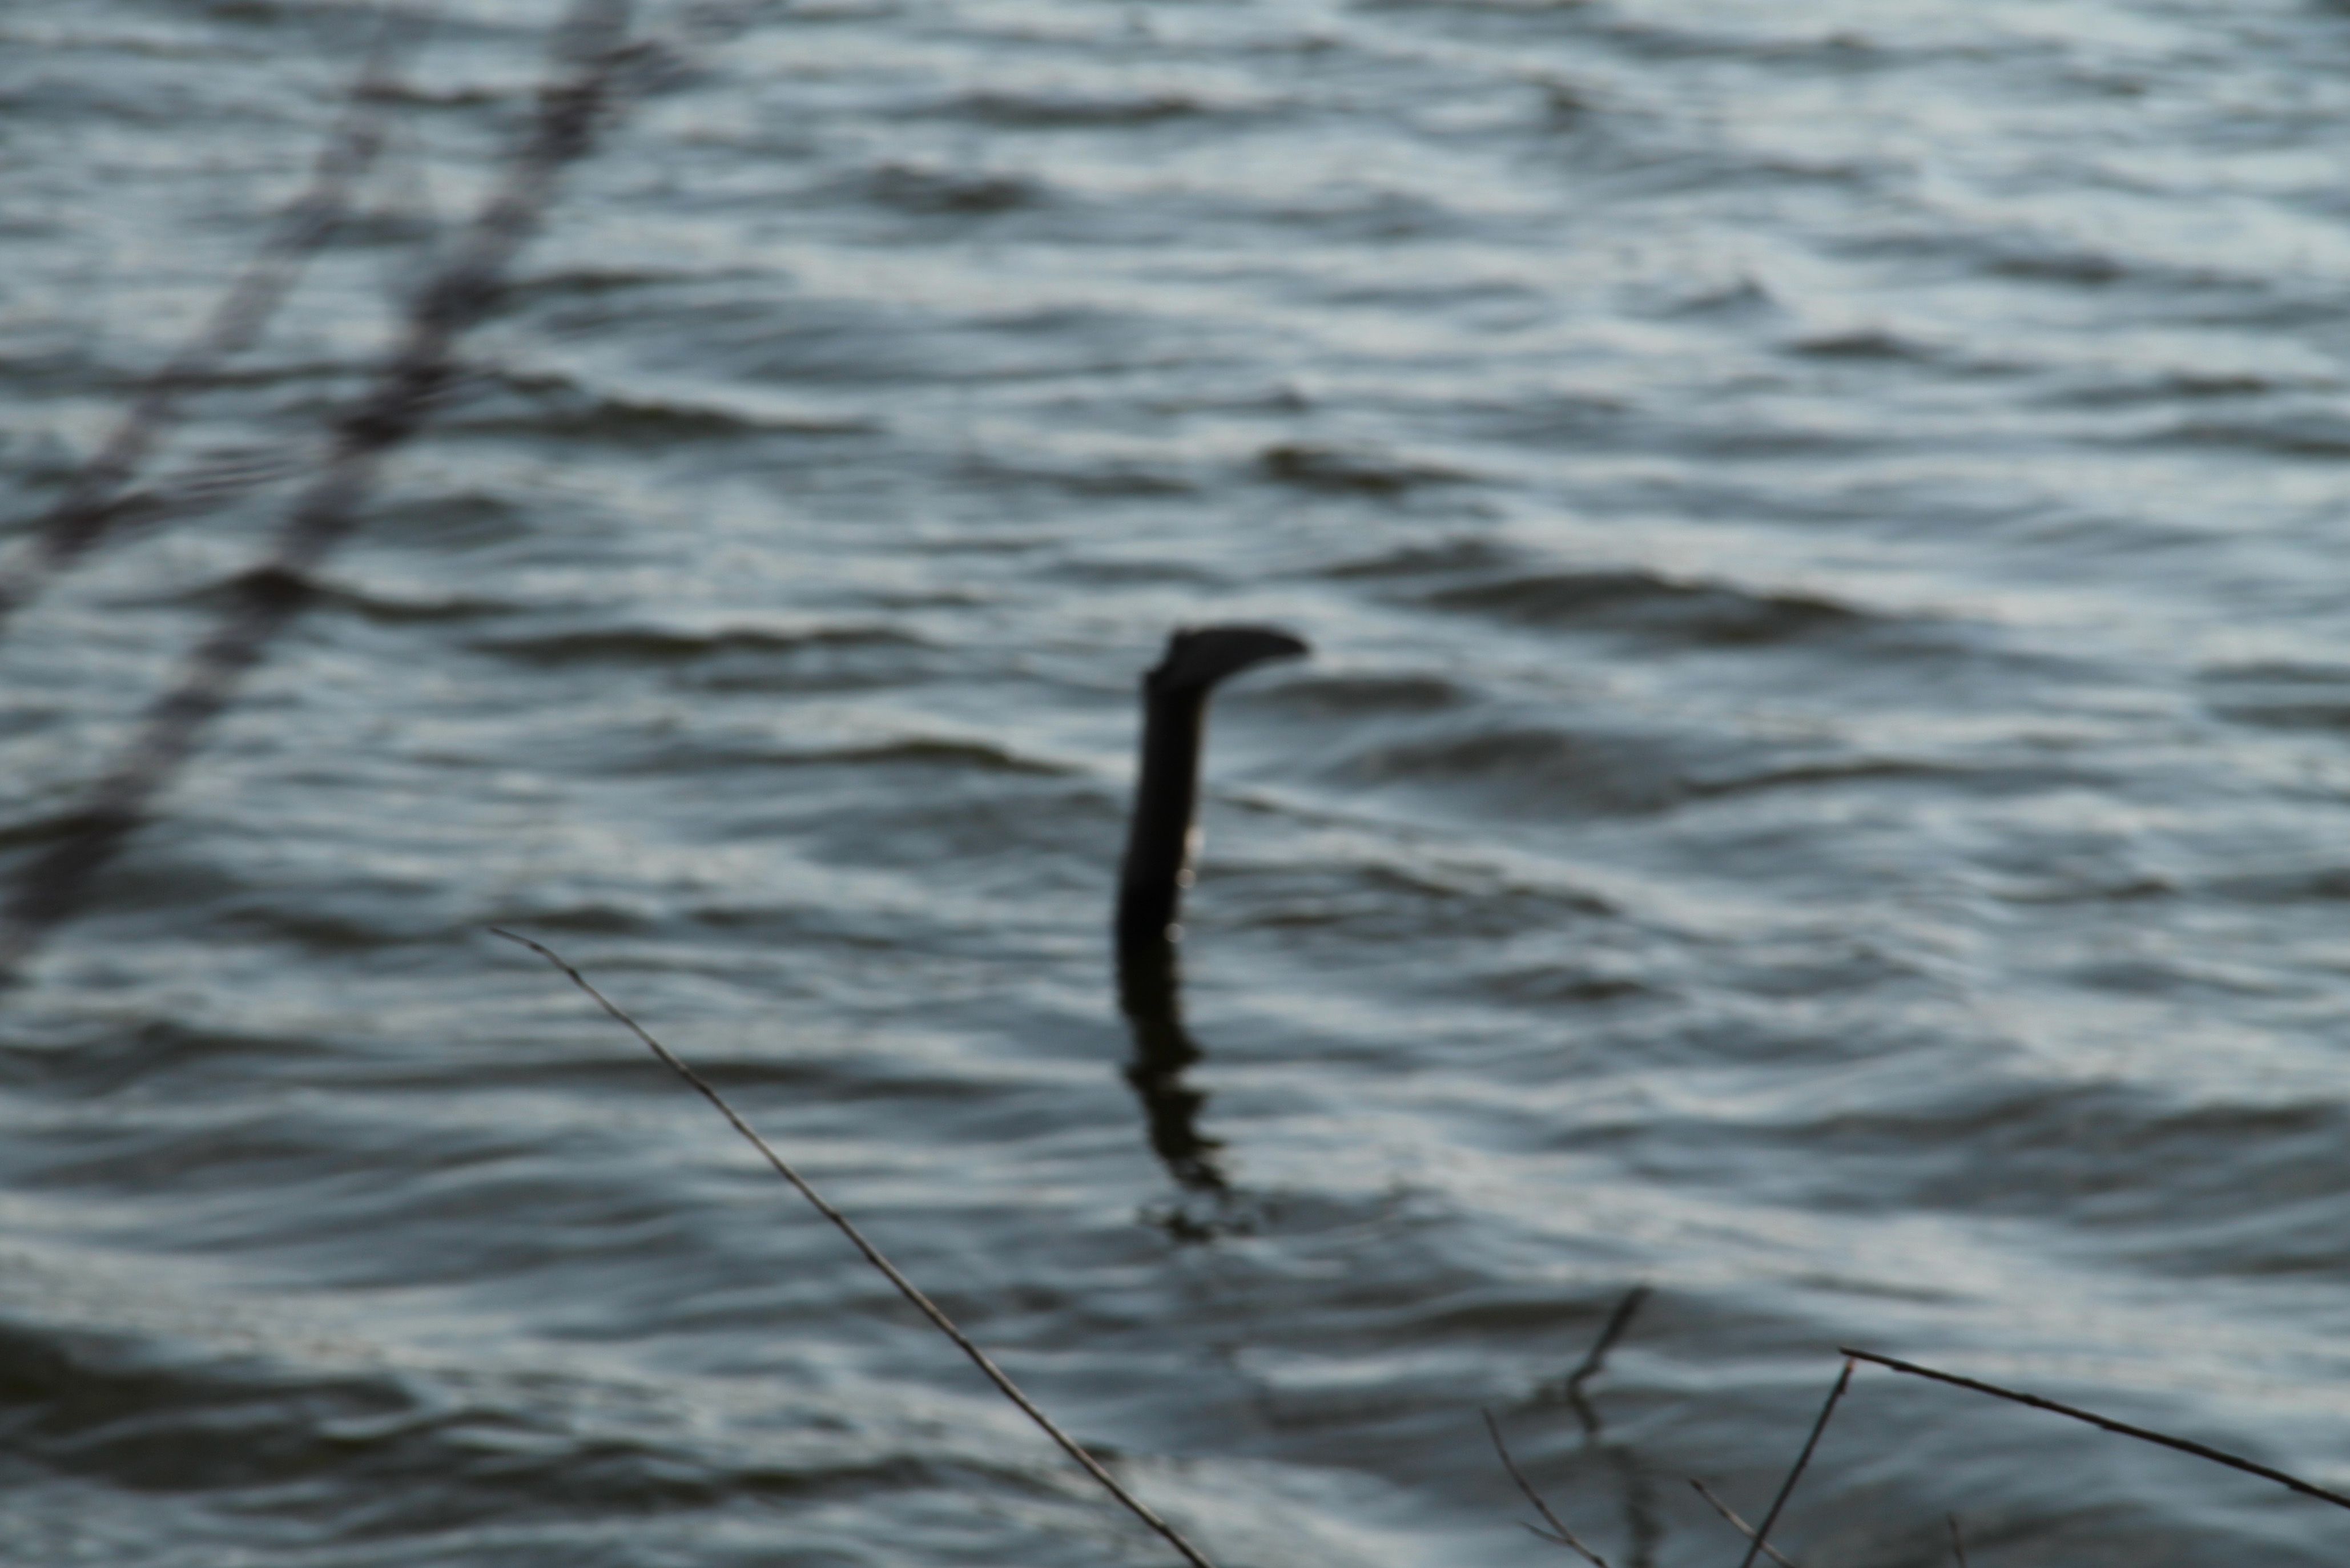 blurred photo of a branch peeping out of water resembling typical Loch Ness Monster picture